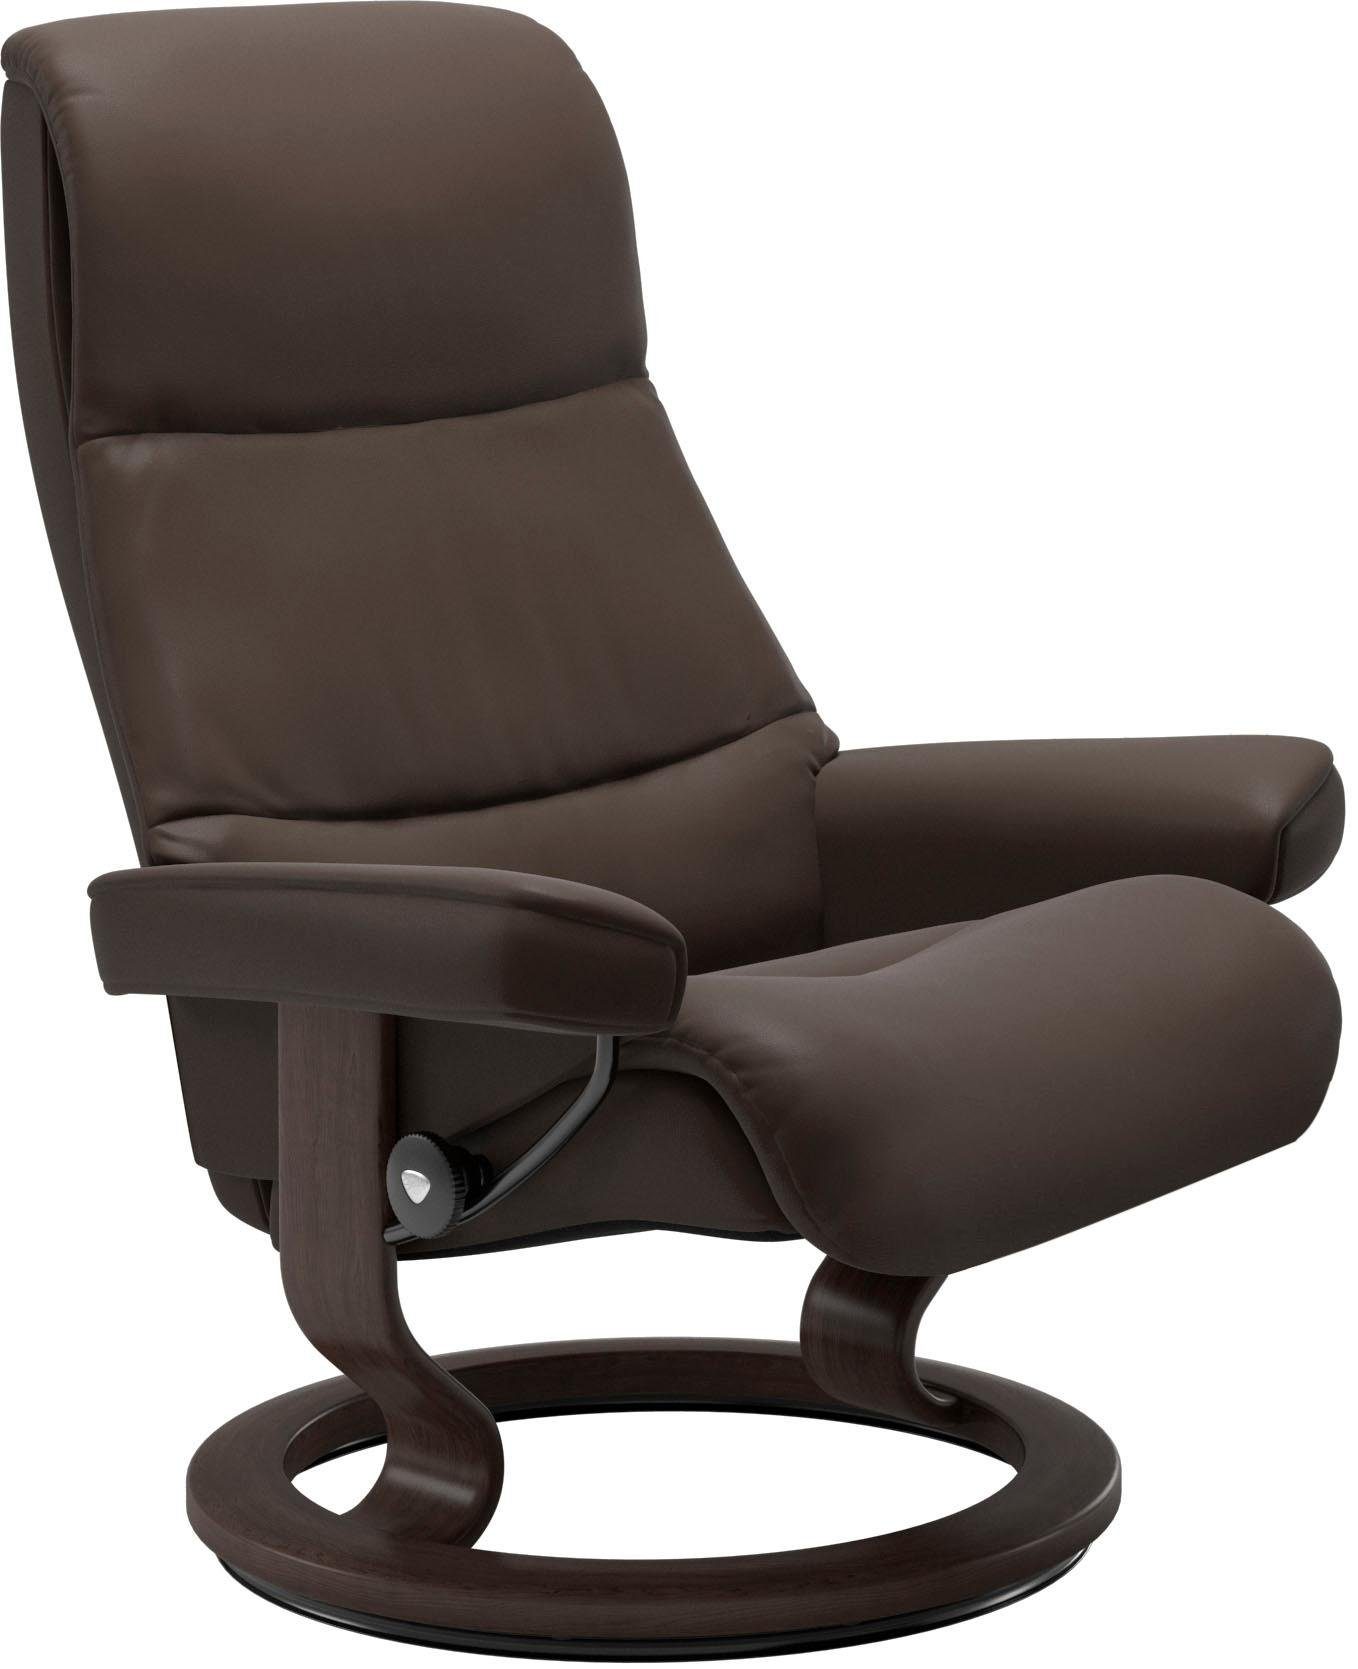 Stressless® Relaxsessel Wenge mit Classic S,Gestell Größe View, Base